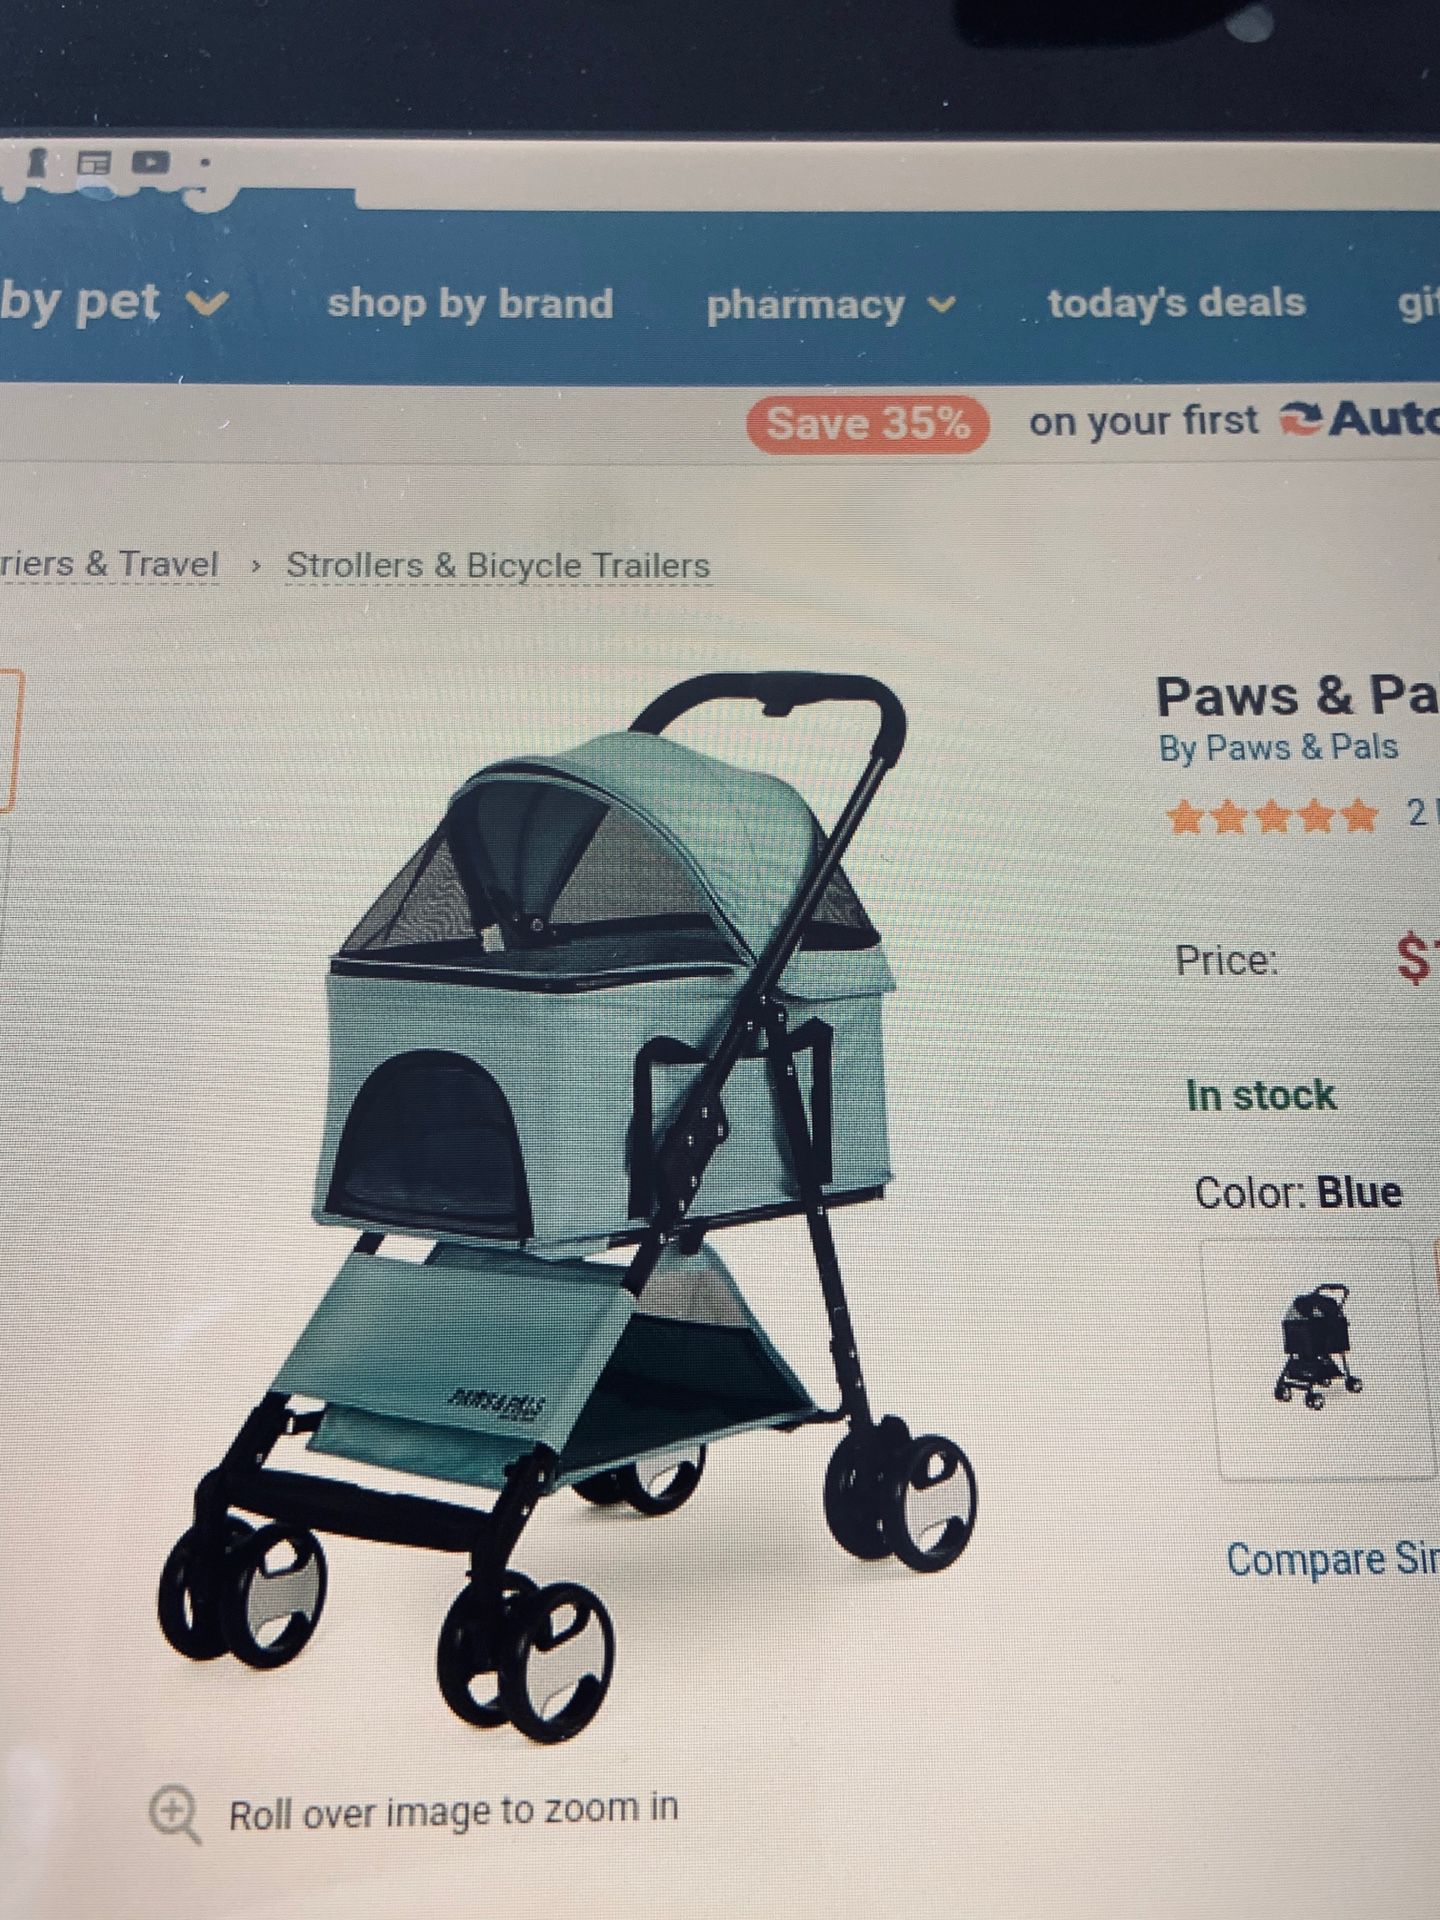 Paws and pals heavy duty pet stroller